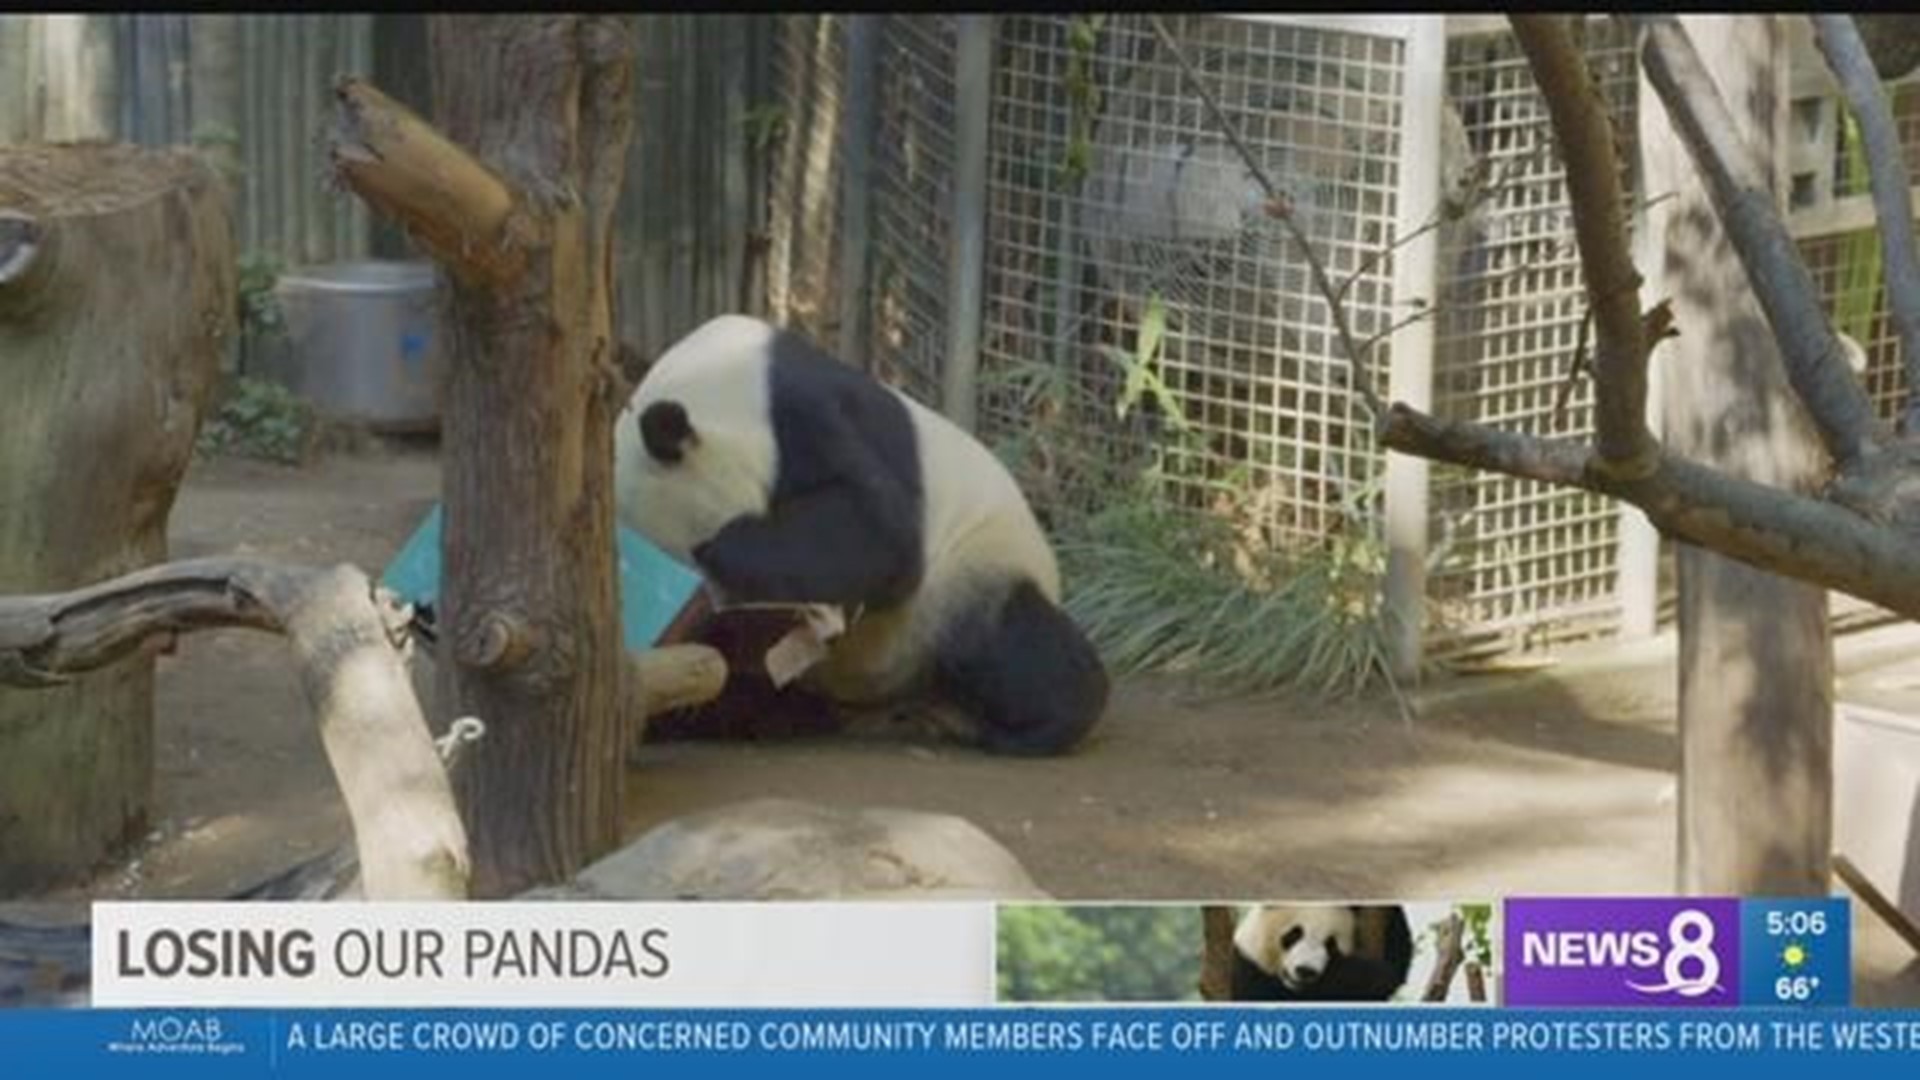 San Diego Zoo will say goodbye to giant pandas in April